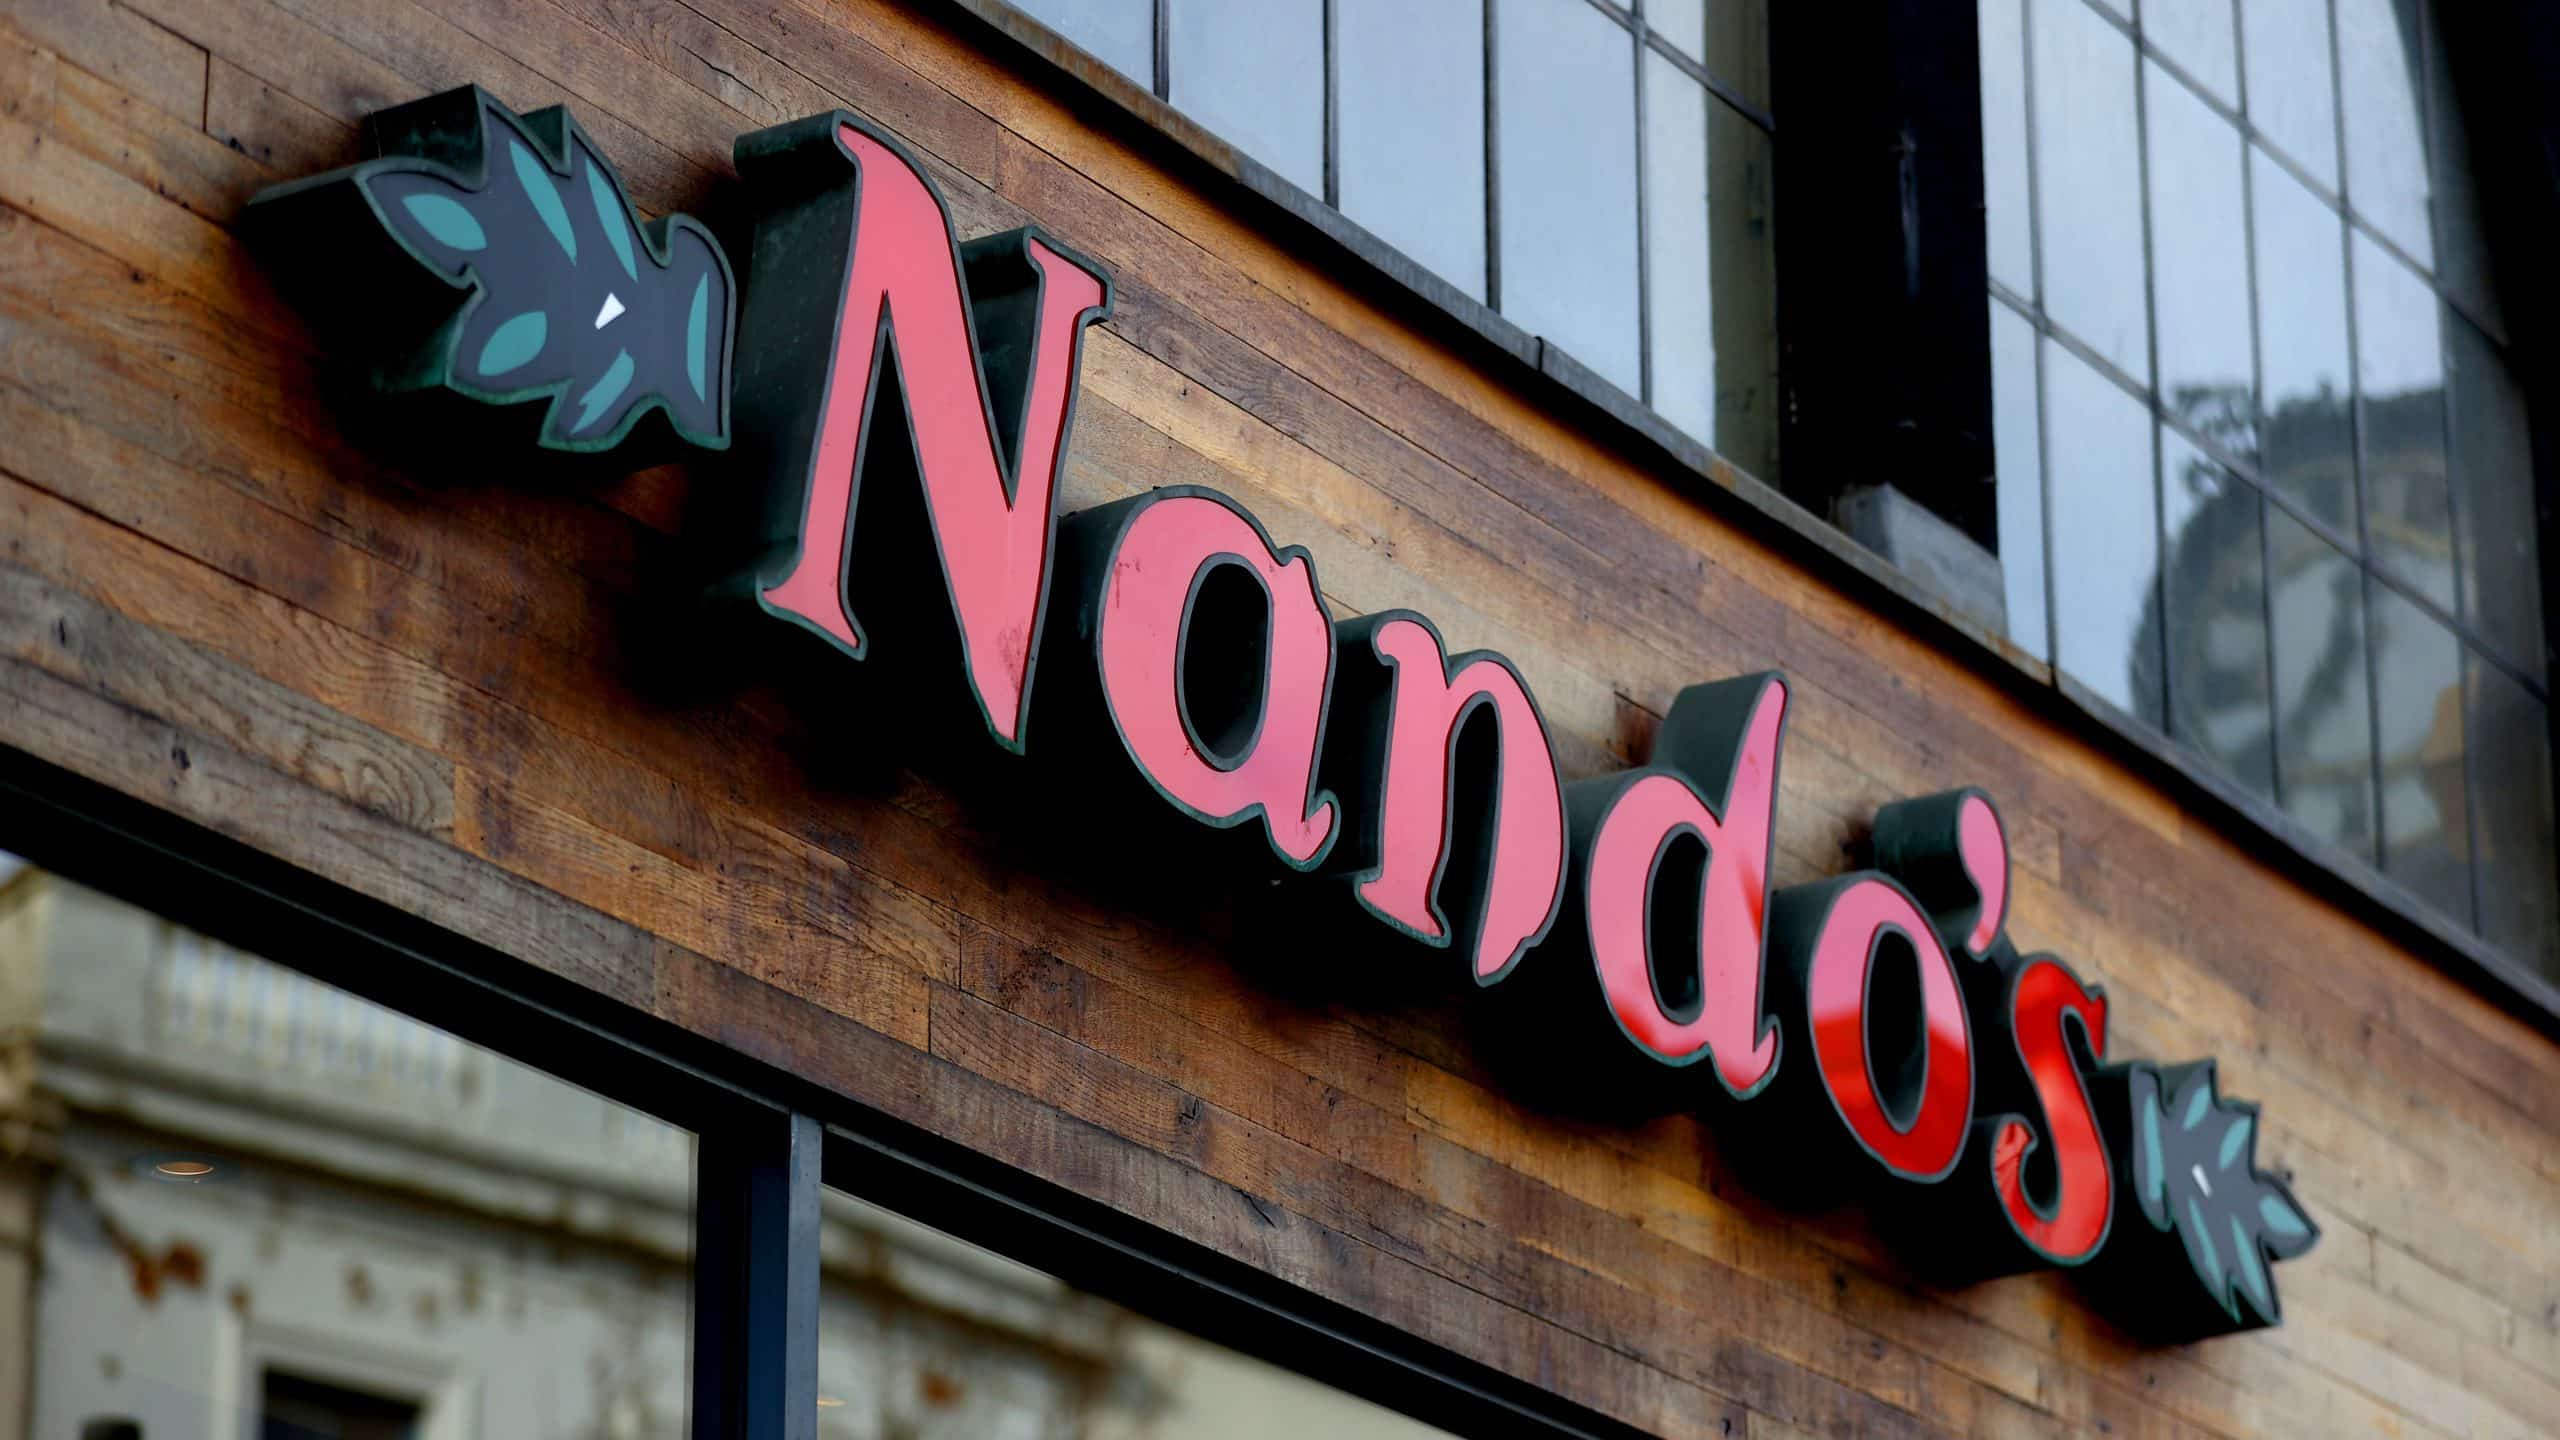 Nando’s reopens restaurant kitchens to feed NHS workers